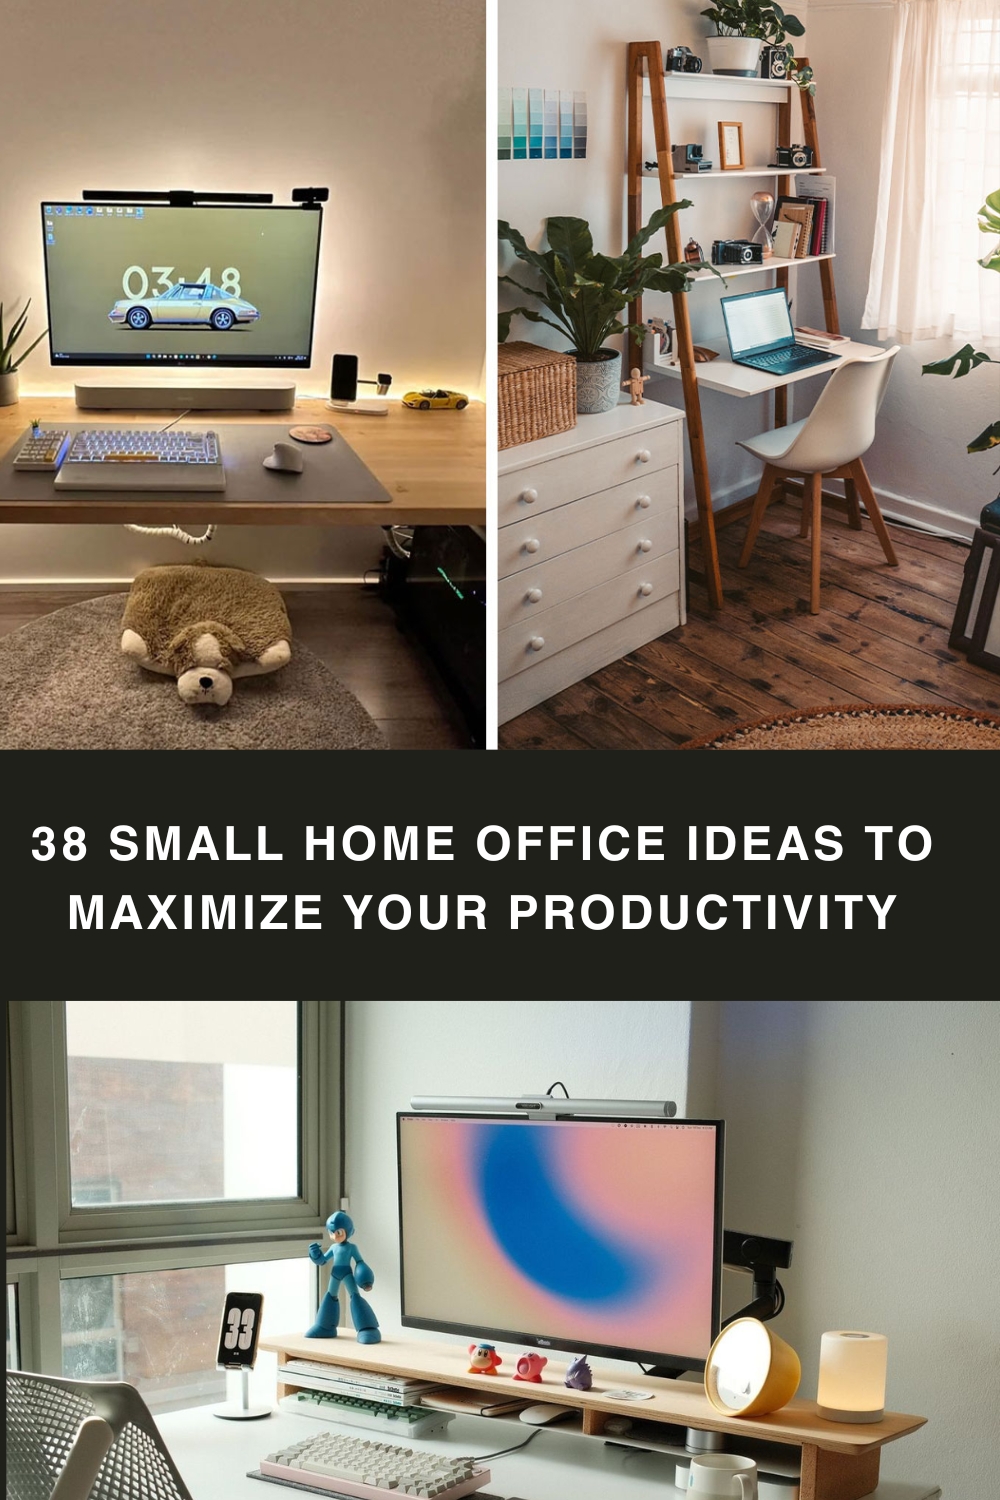 38 Small Home Office Ideas to Maximize Your Productivity pin